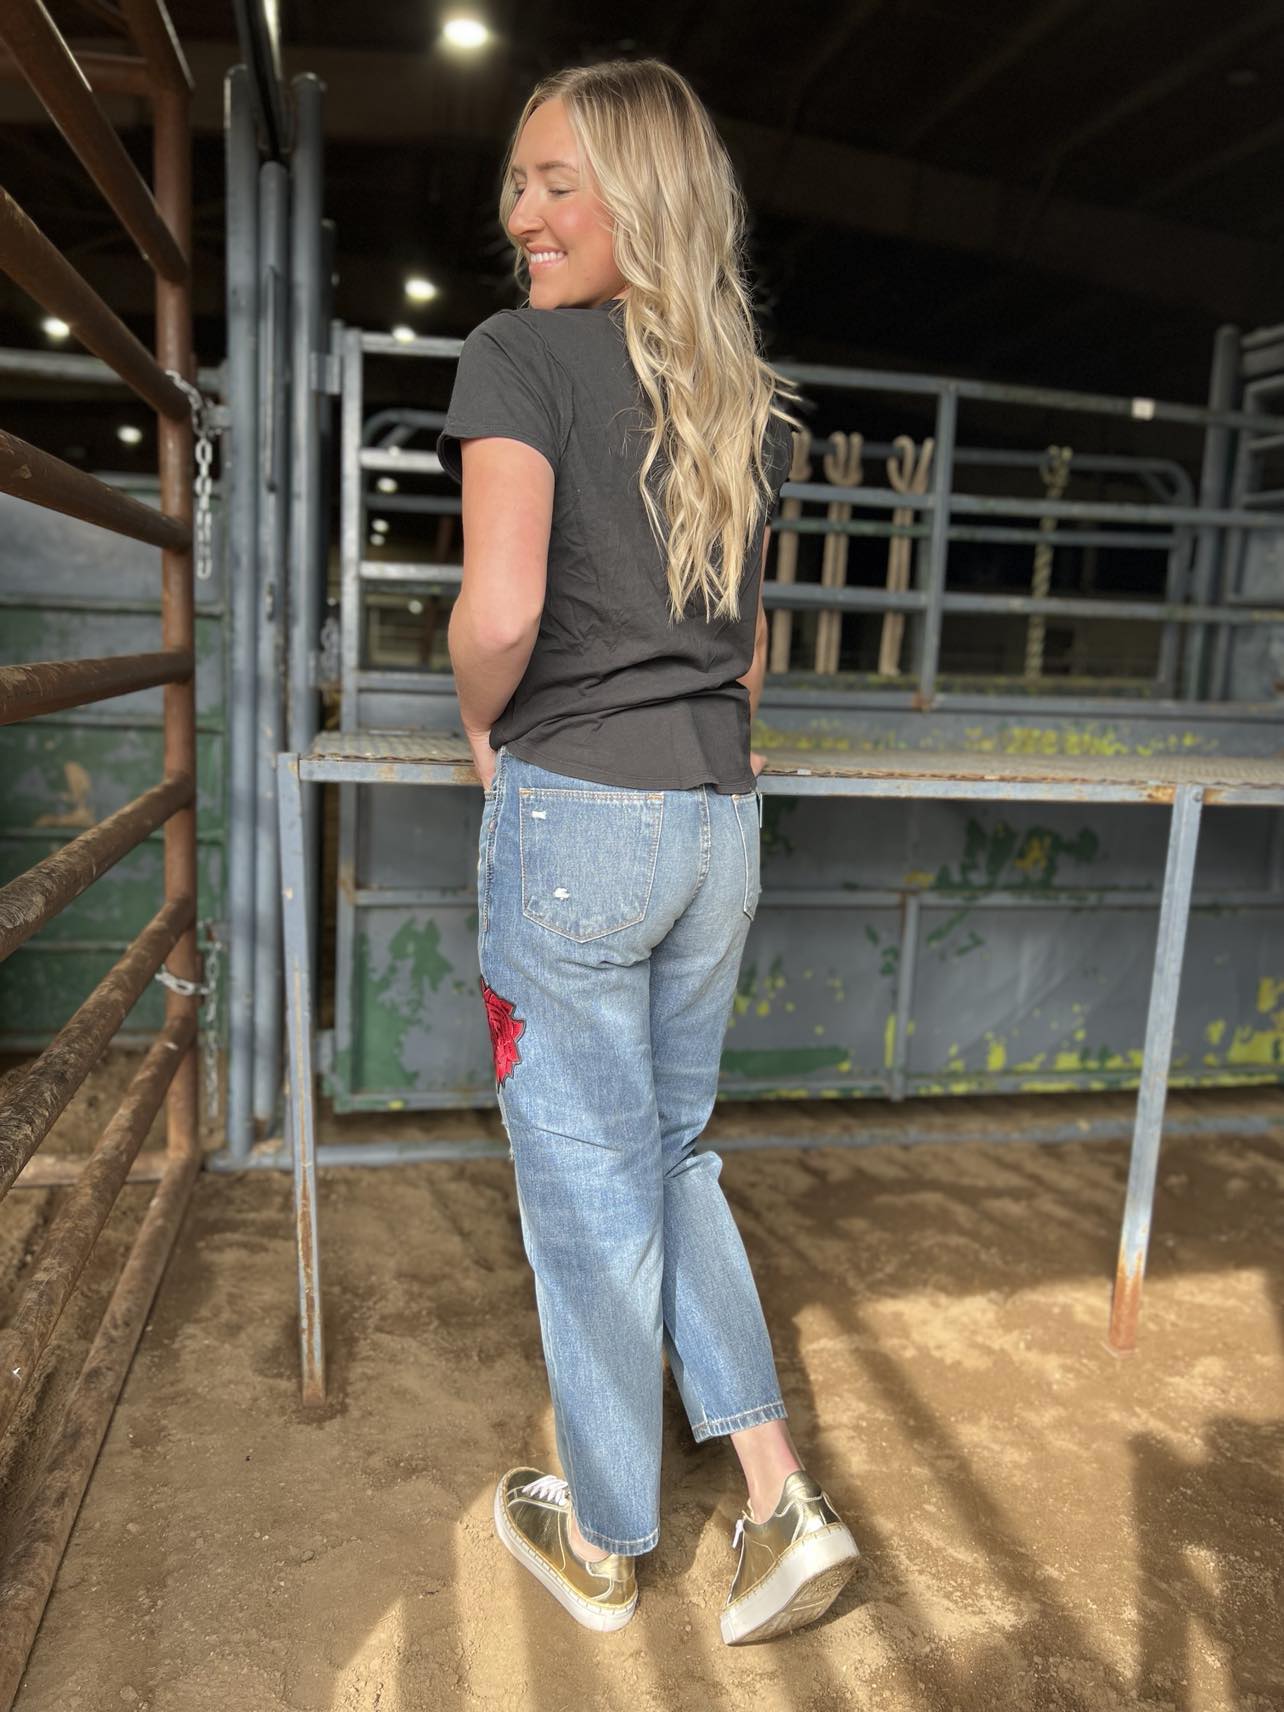 Women's Ariat Rodeo Quincy Jeans-Women's Denim-Ariat-Lucky J Boots & More, Women's, Men's, & Kids Western Store Located in Carthage, MO